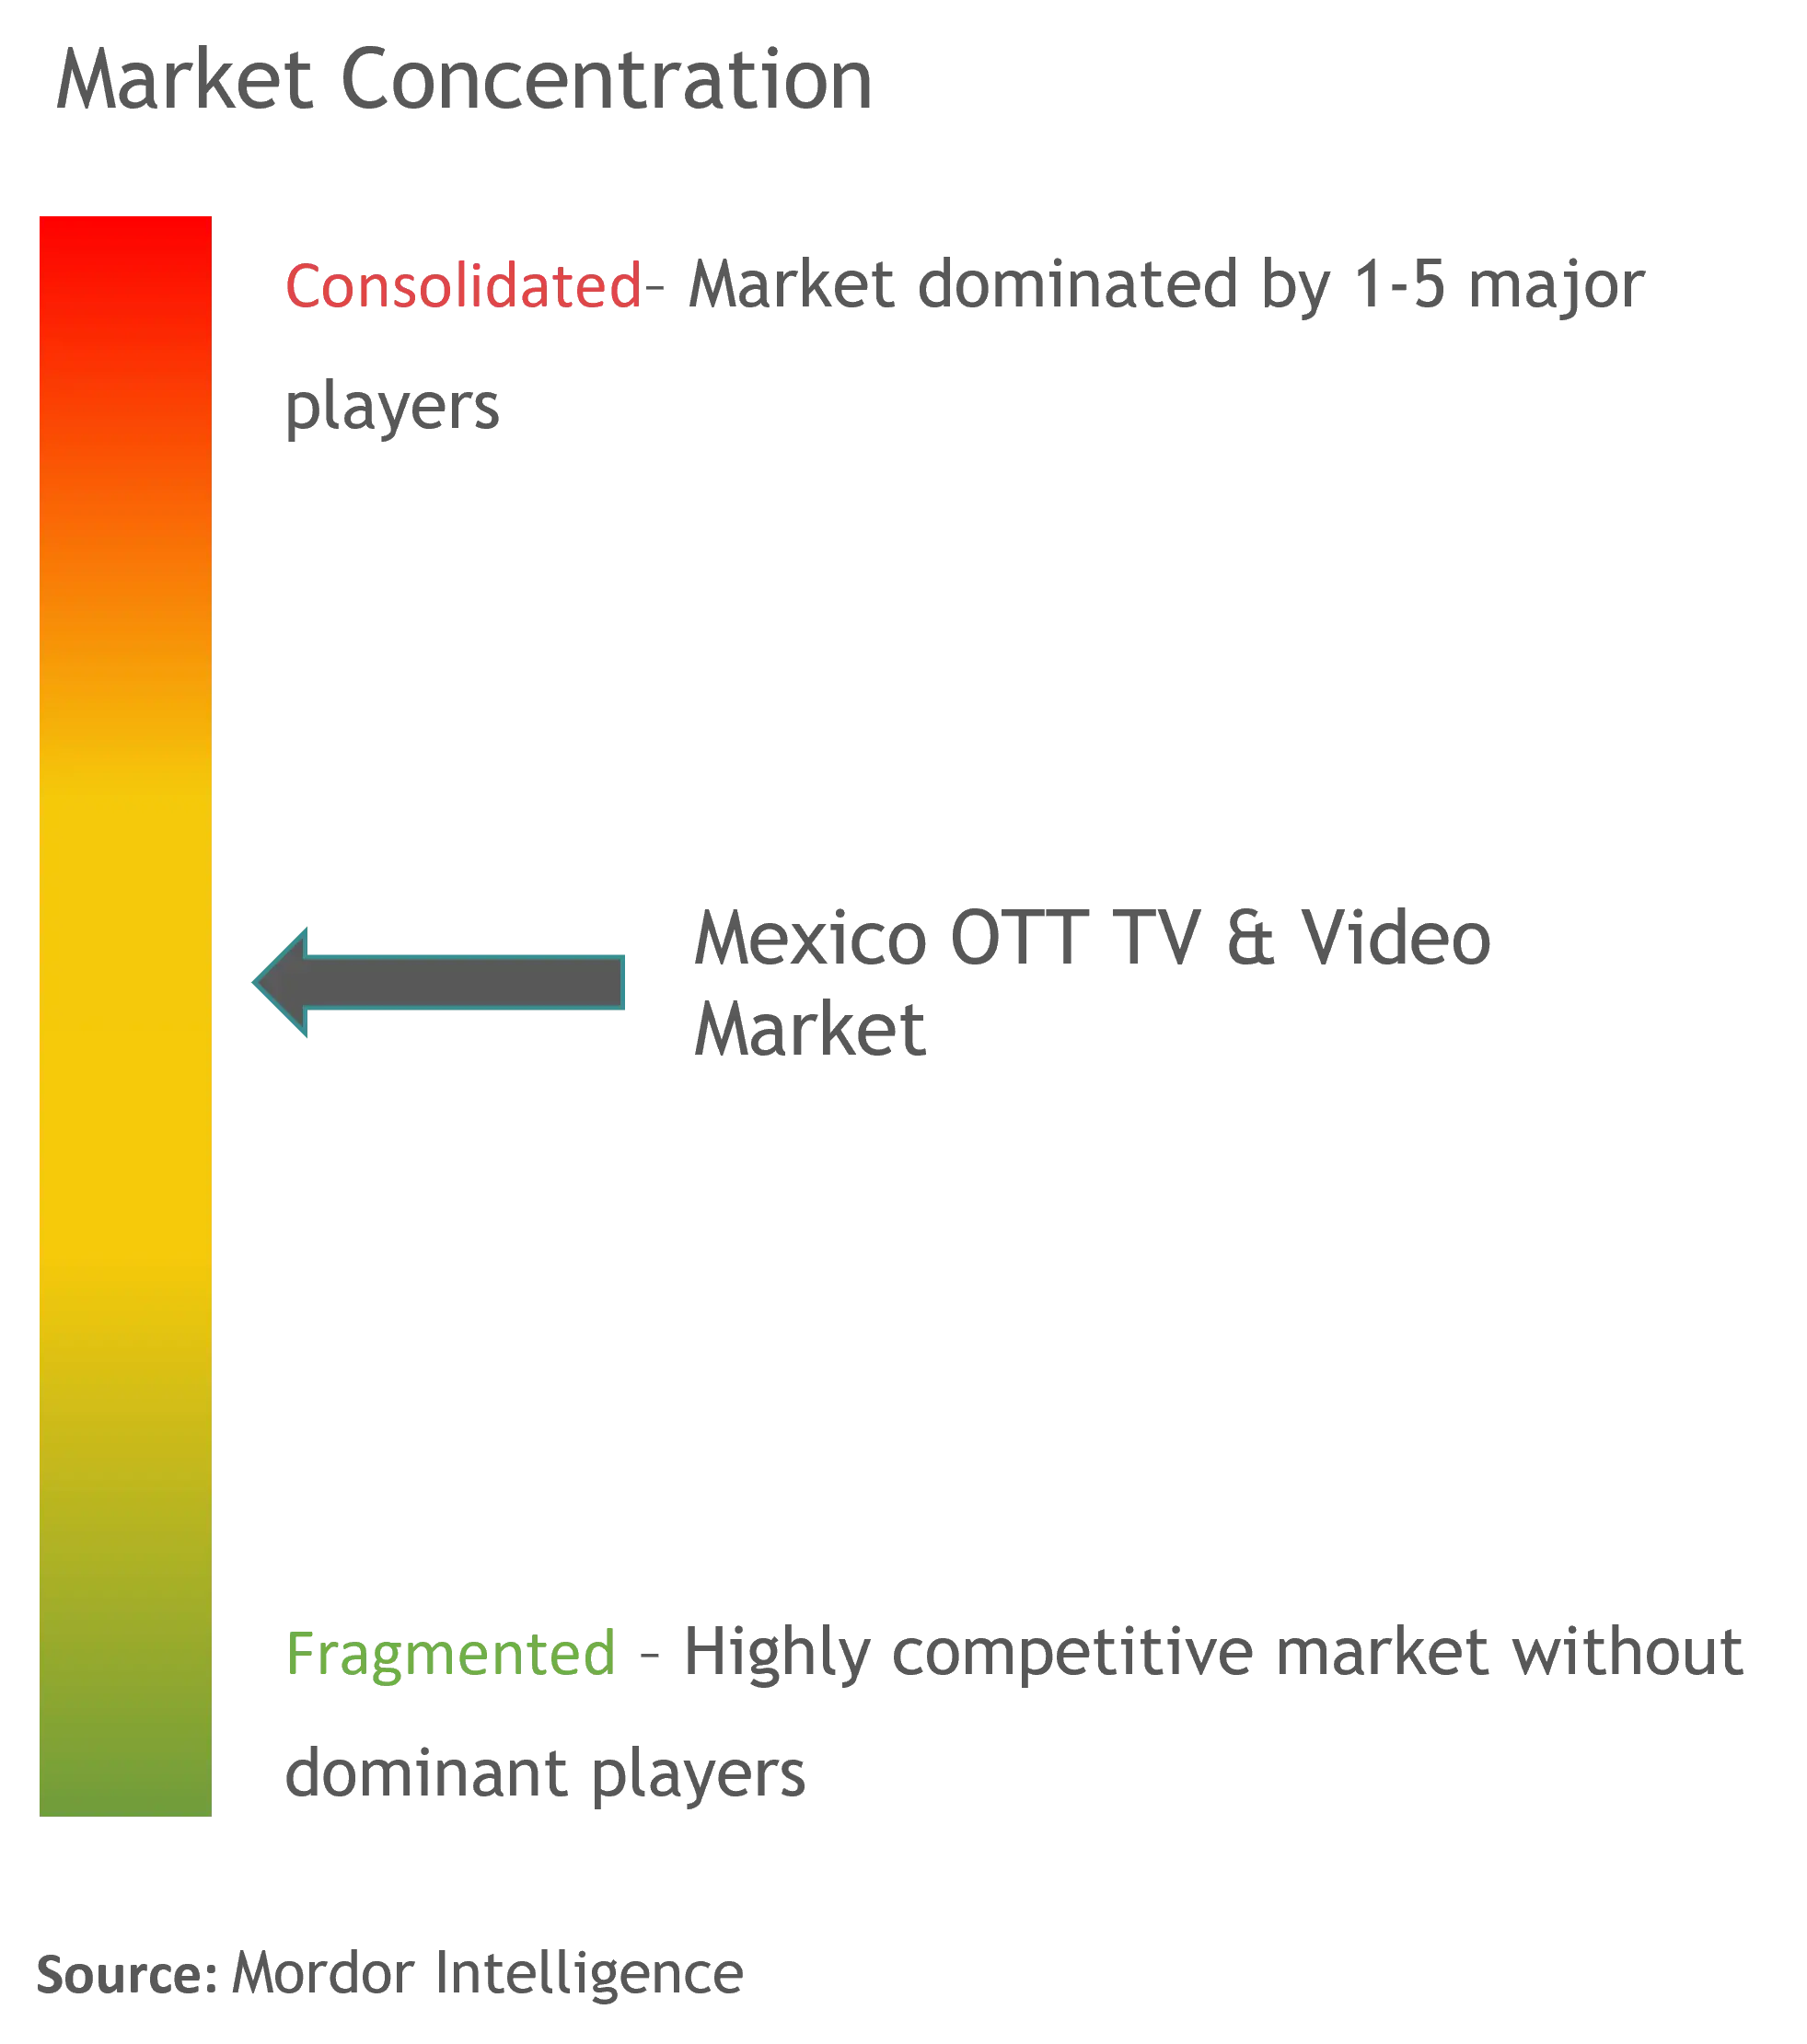 Mexico OTT TV and Video Market Concentration